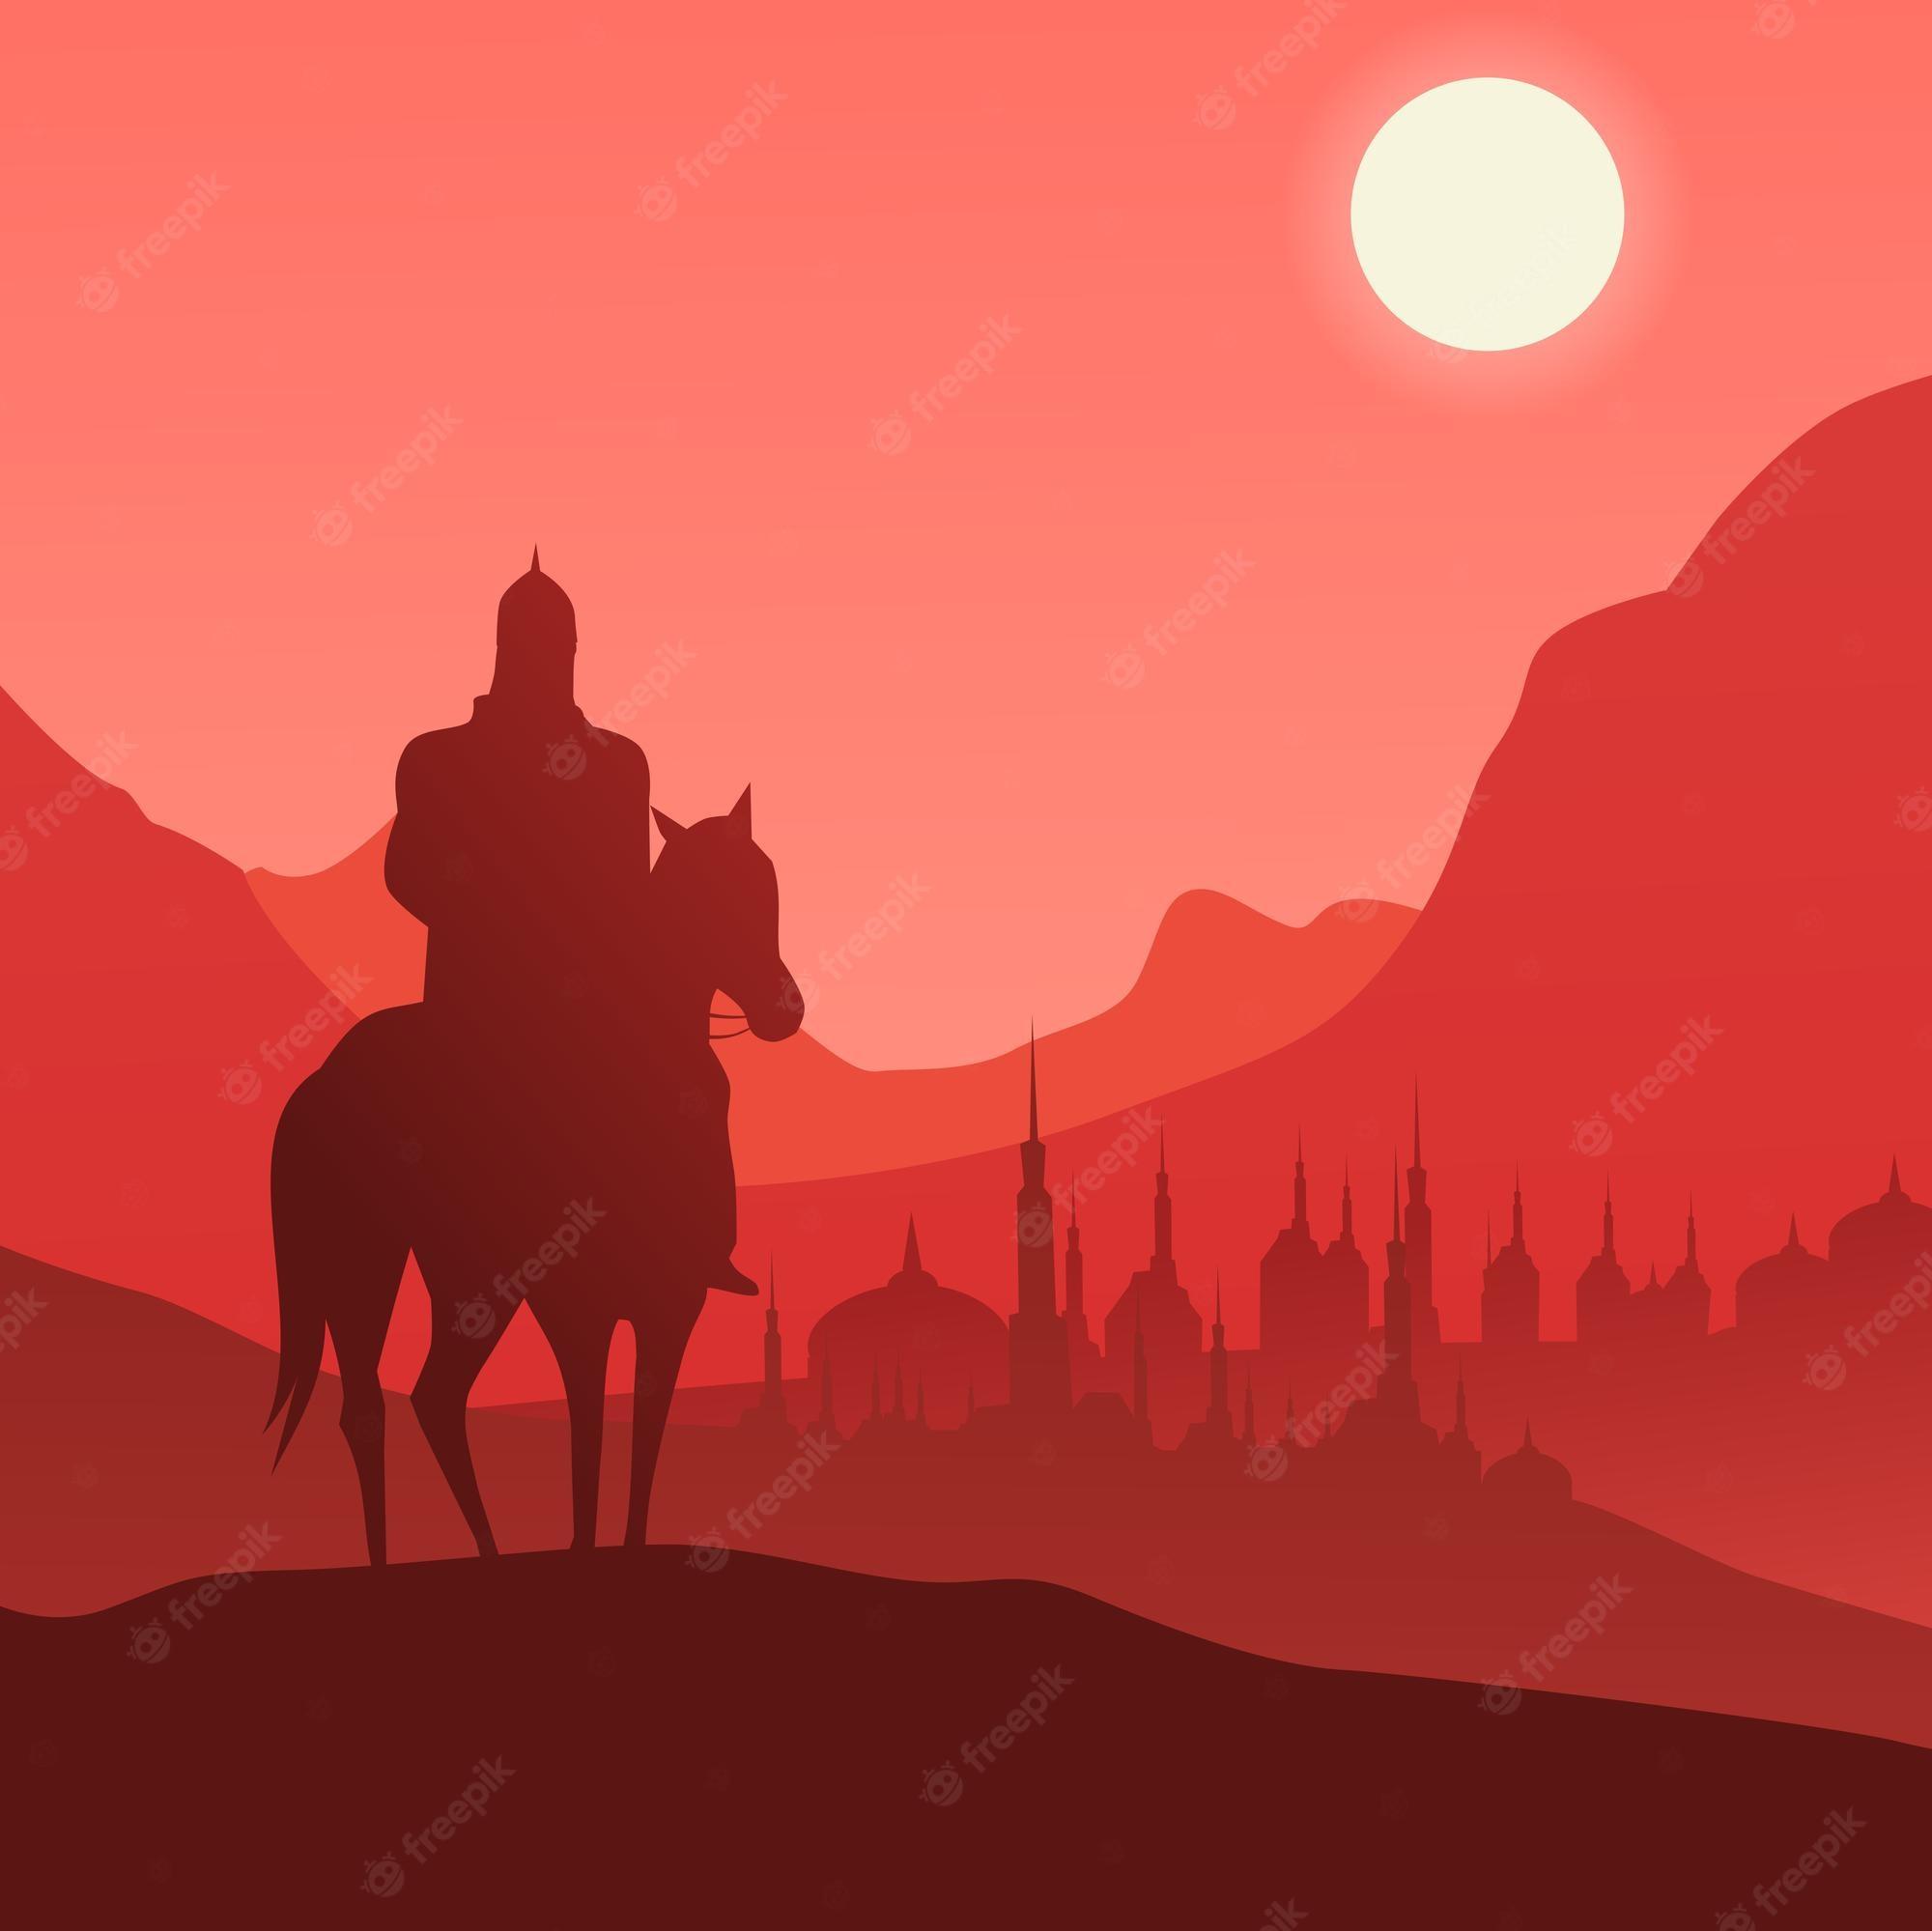 Premium Vector Arabian Knight Horse In Silhouette Concept With